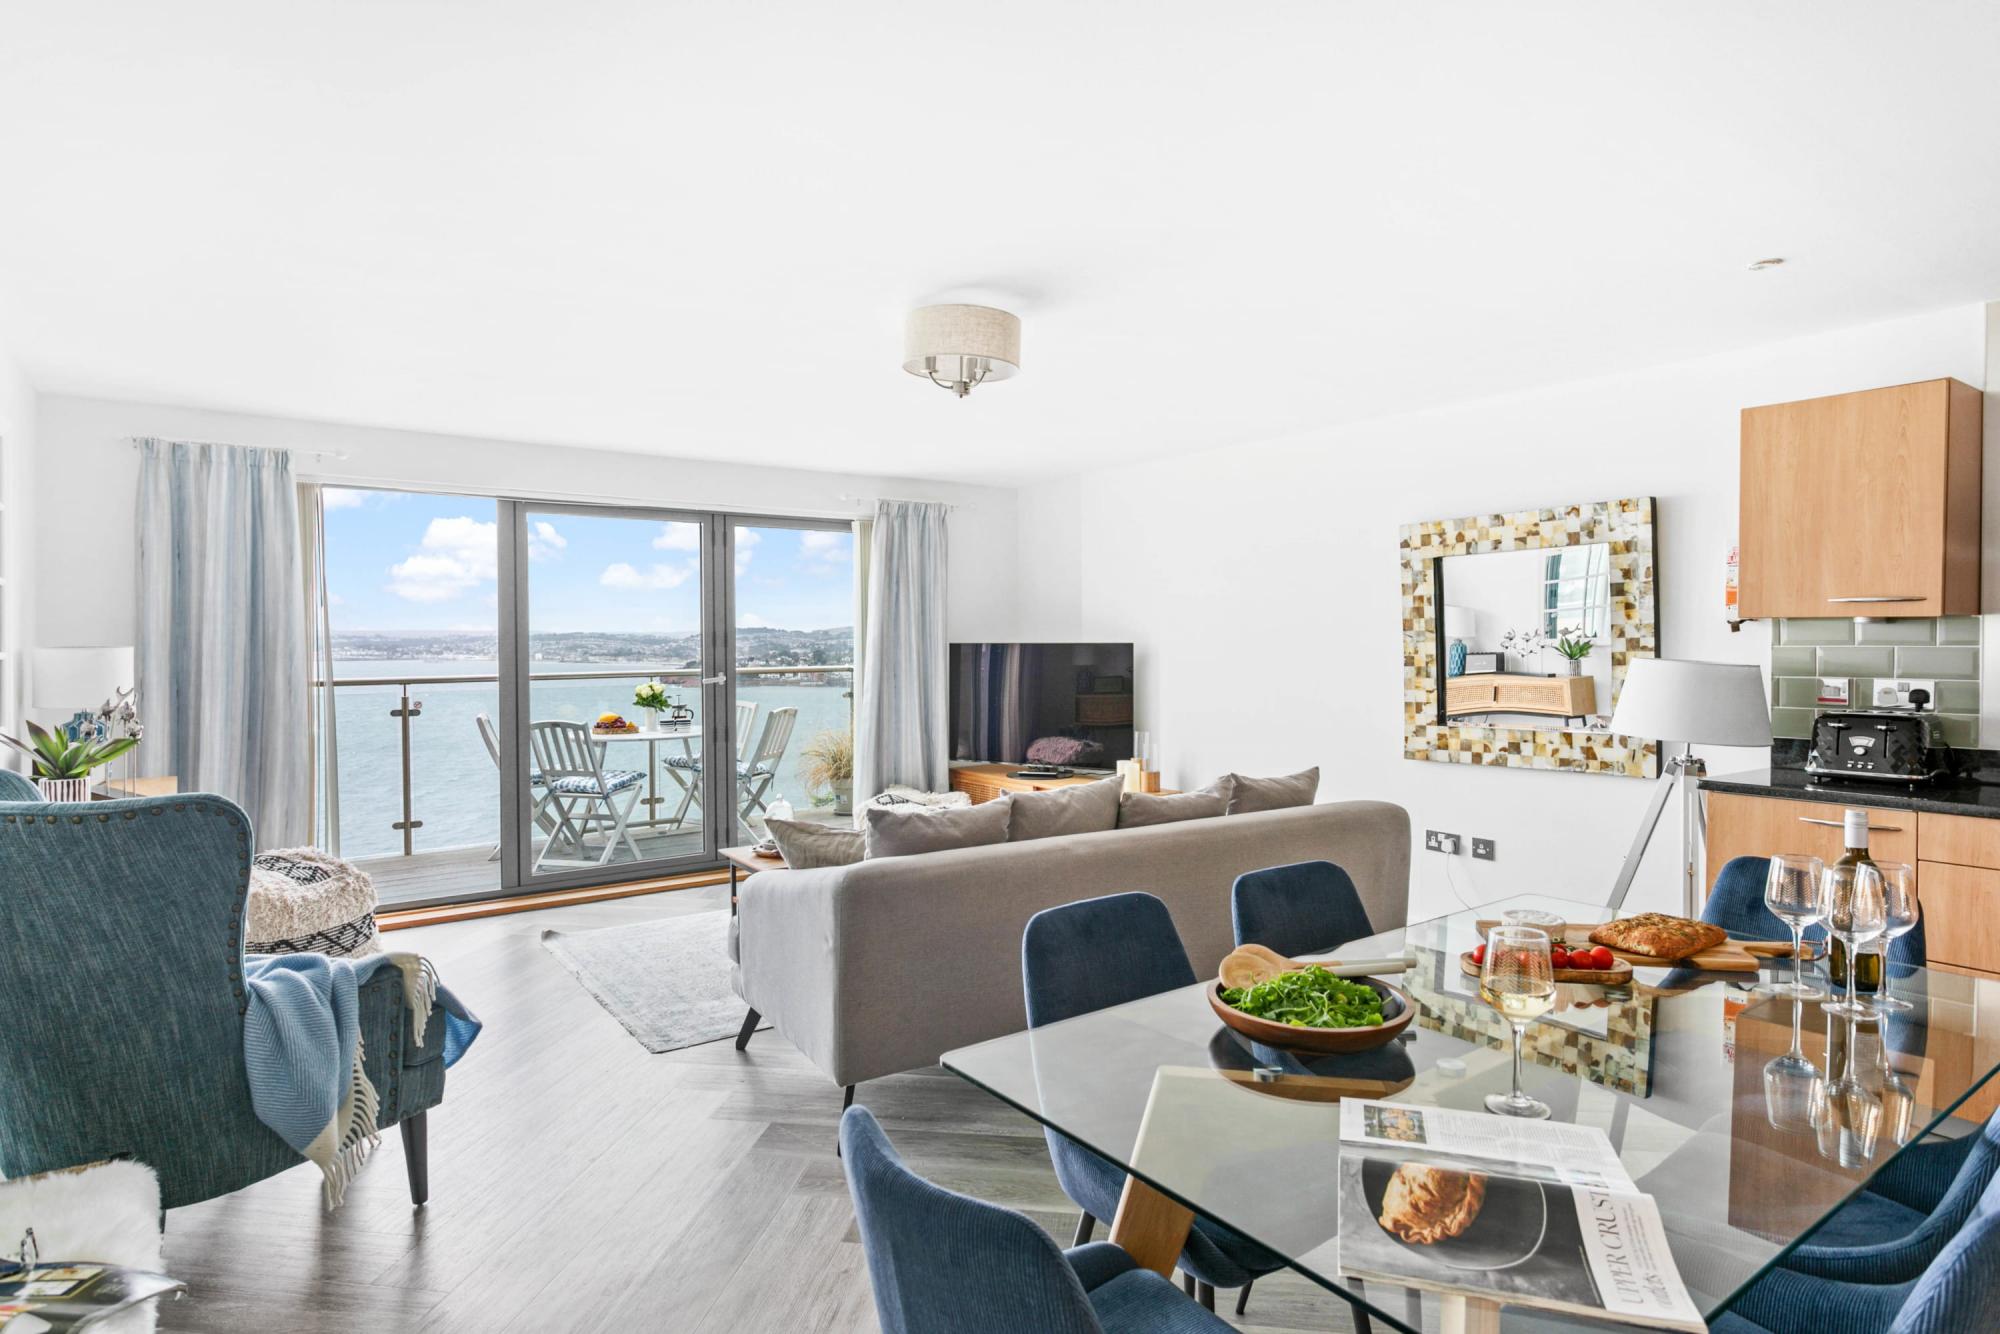 Property Image 2 - A7 Masts - Striking beachside apartment with beautiful sea views  private balcony and secure parking